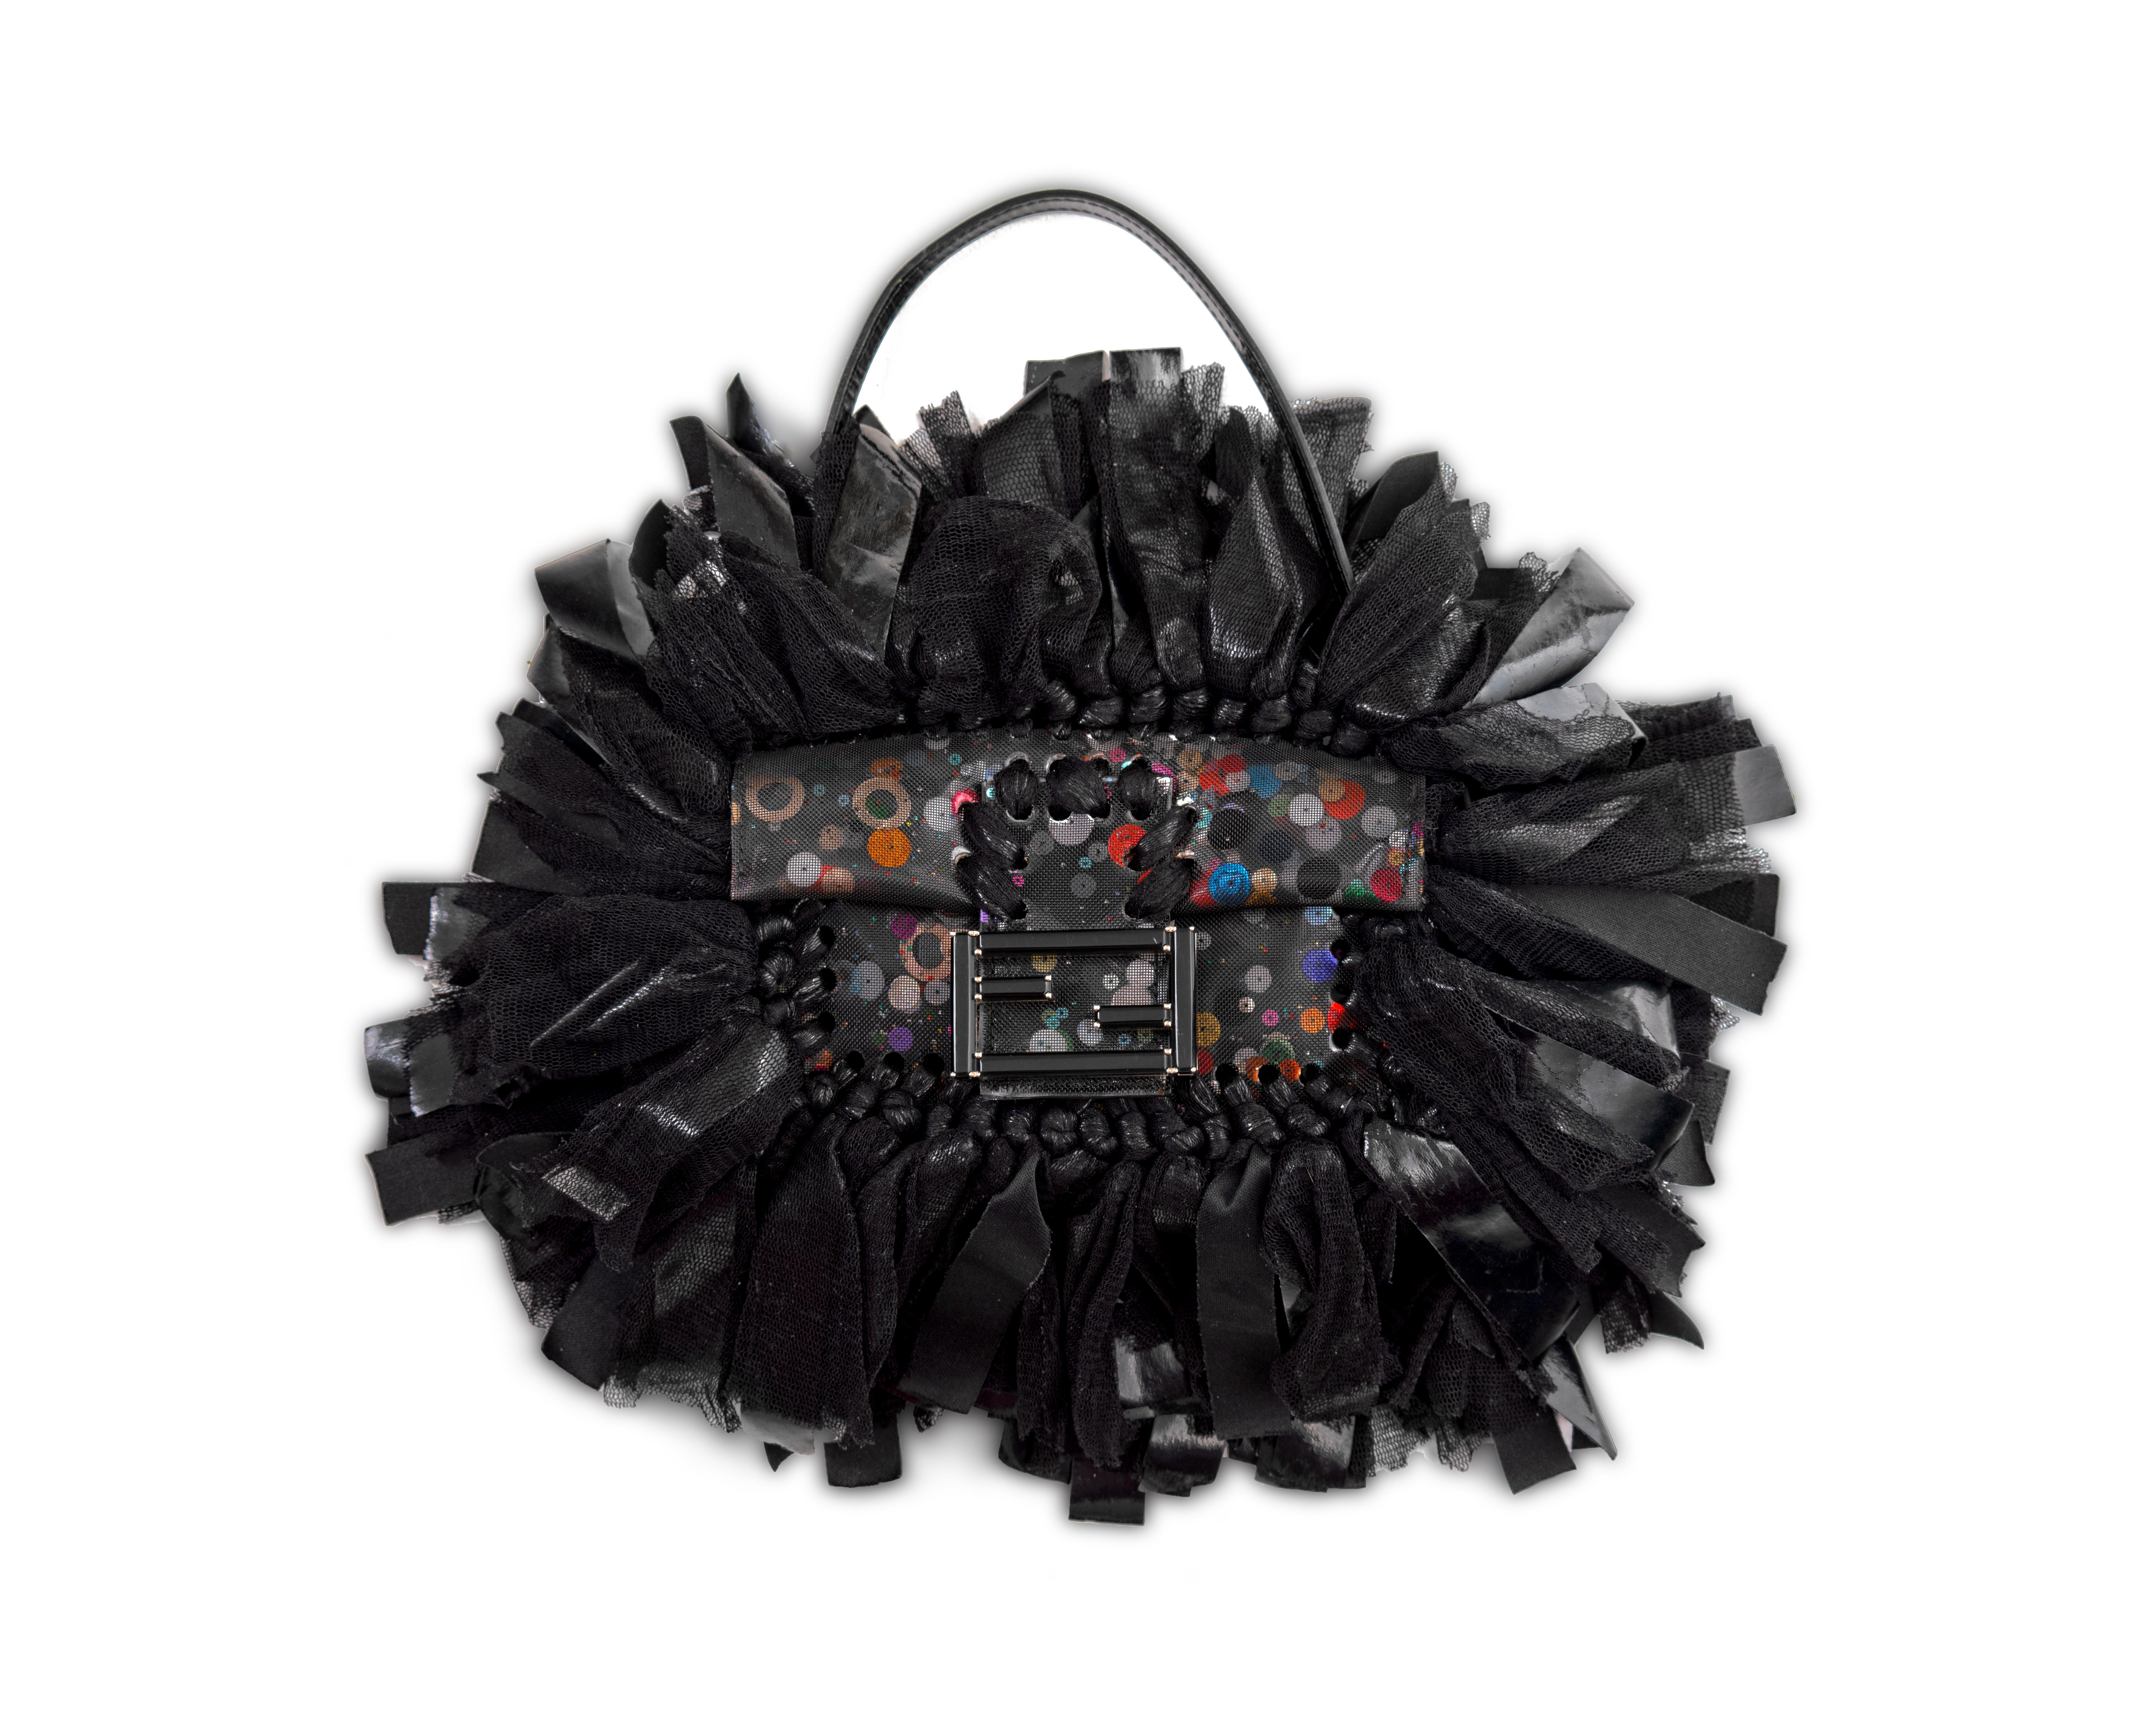 ▪ Fendi evening mini baguette bag
▪ Creative Director: Karl Lagerfeld 
▪ Sold by One of a Kind Archive'
▪ c. 2000
▪ Limited edition artisanal piece 
▪ Hand woven pvc-coated and silk mesh tassels 
▪ Constructed from black plastic mesh
▪ Incased